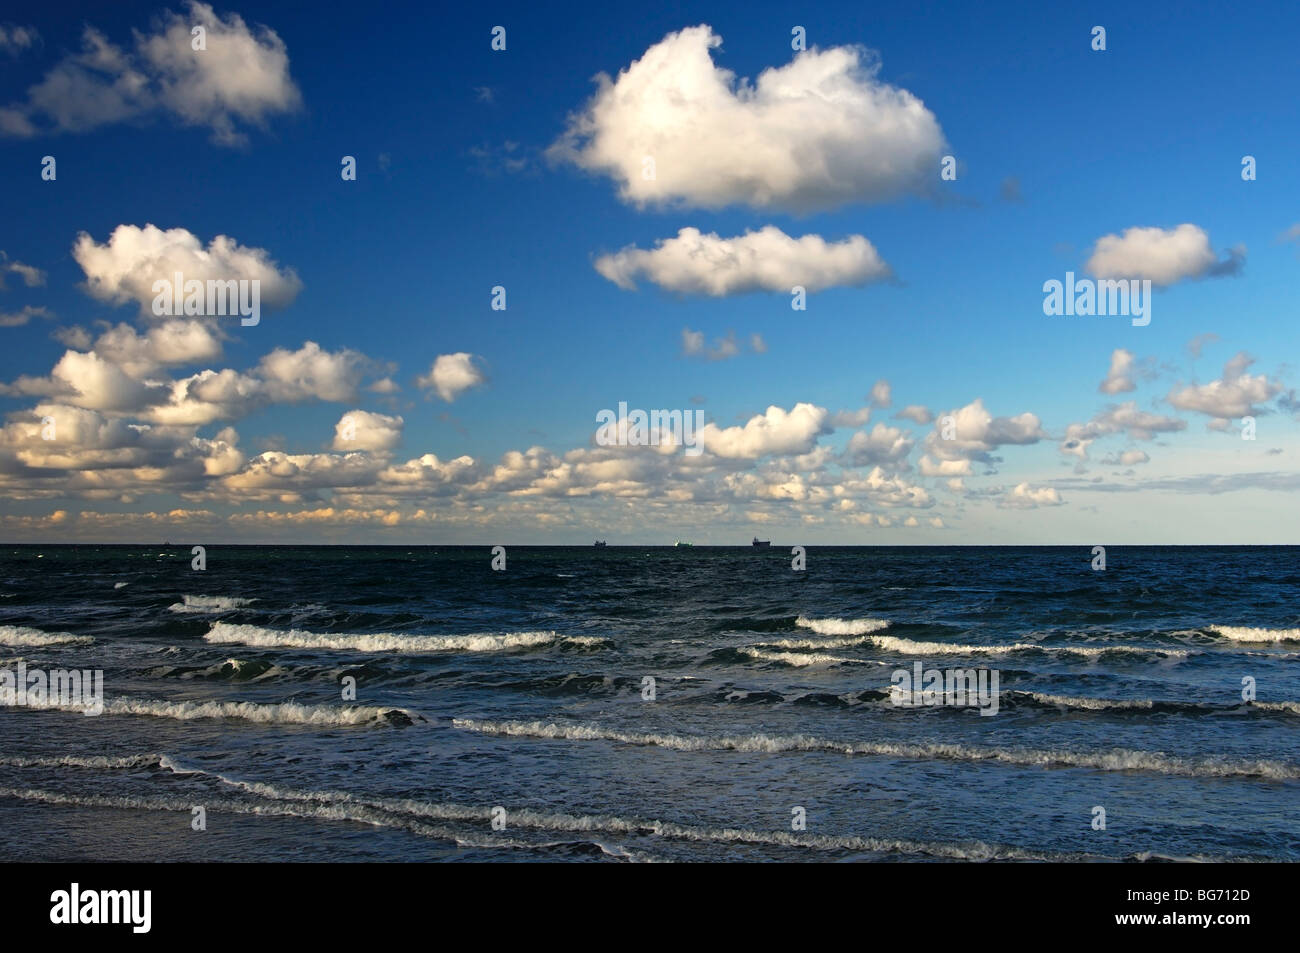 Motion-blurred sea with white wave crests under a cloudy sky, Baltic Sea, Rostock-Warnemuende, Germany Stock Photo